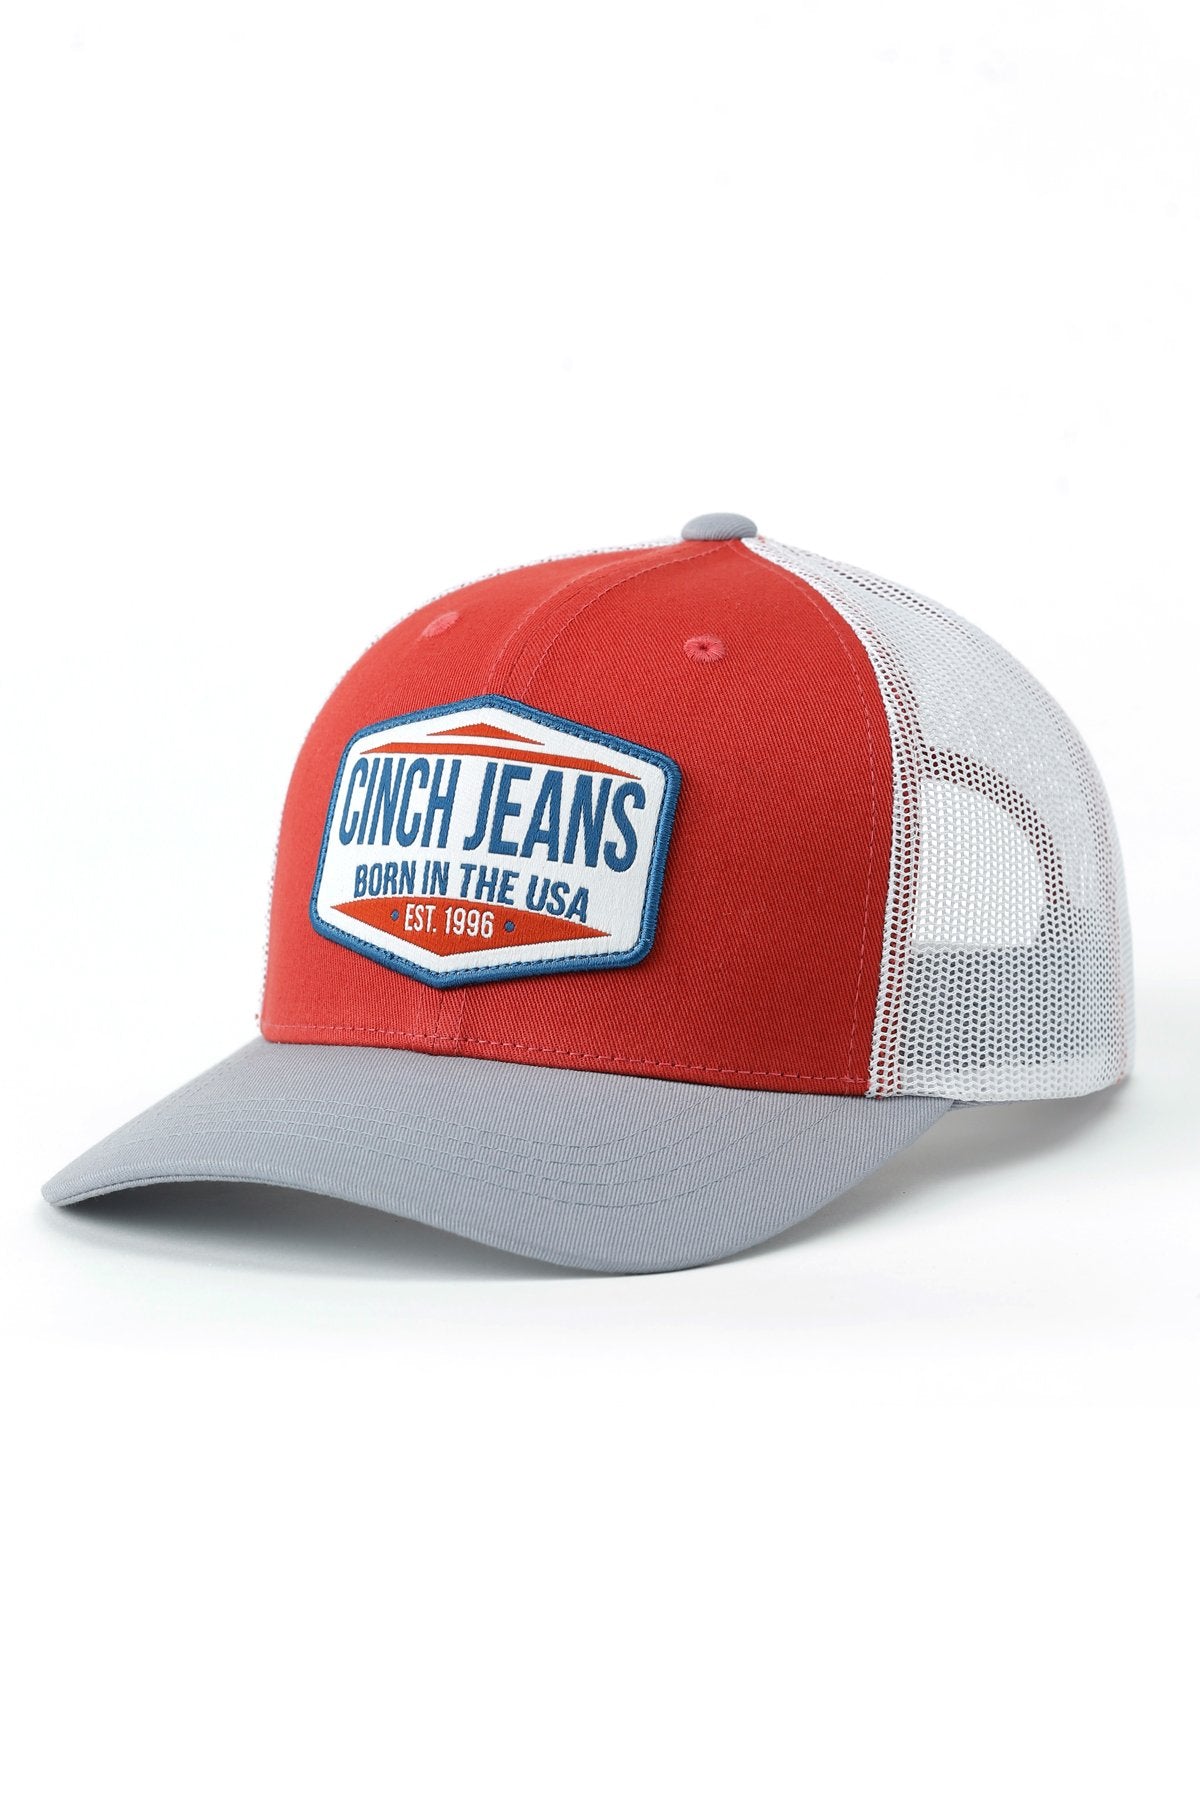 Mens Cinch Jeans Born in The USA Cap - Red - MCC0660631